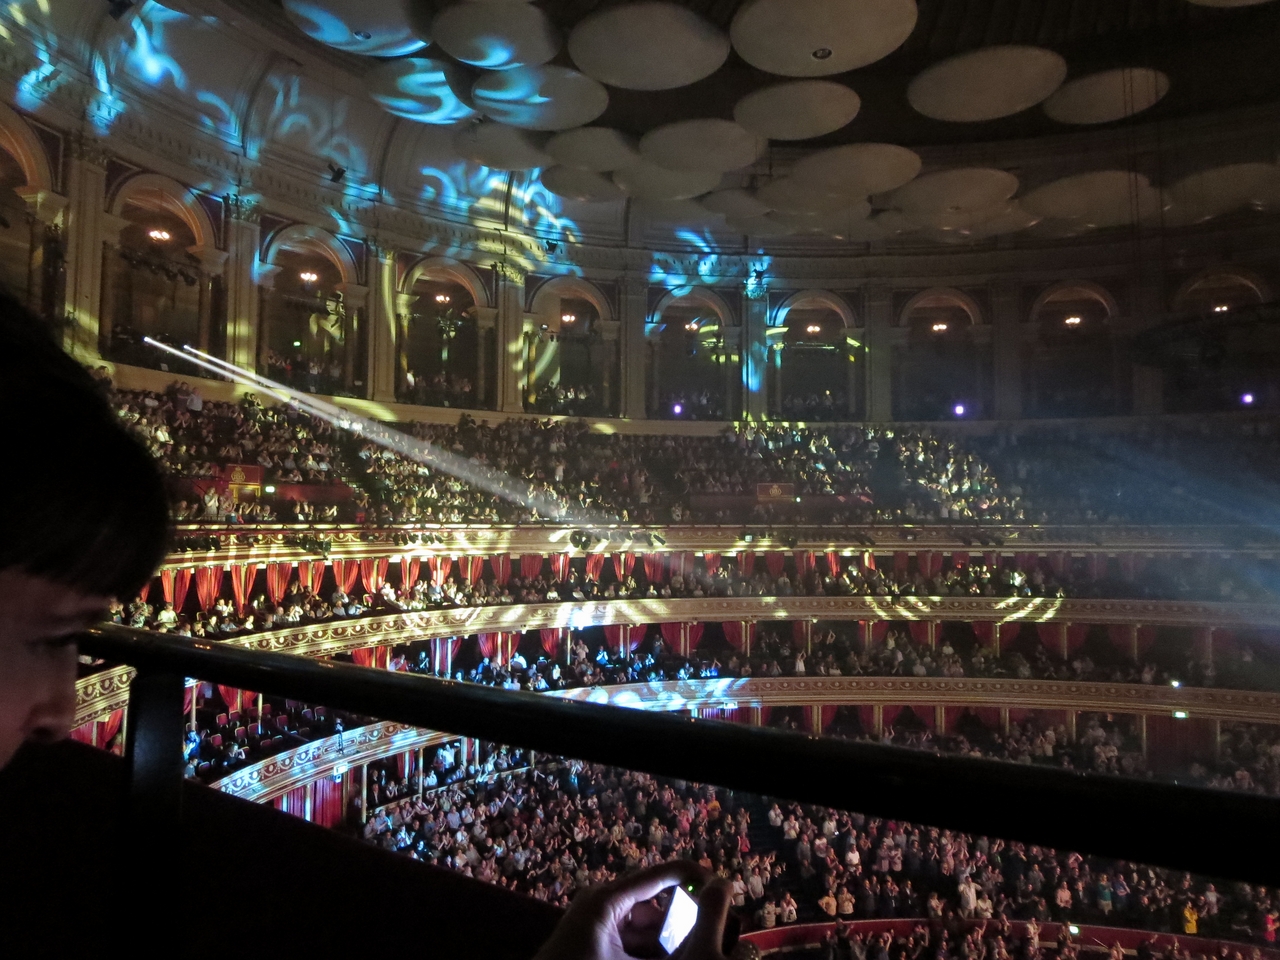 20 Orchestral Manoeuvres In The Dark live at the RAH.jpg